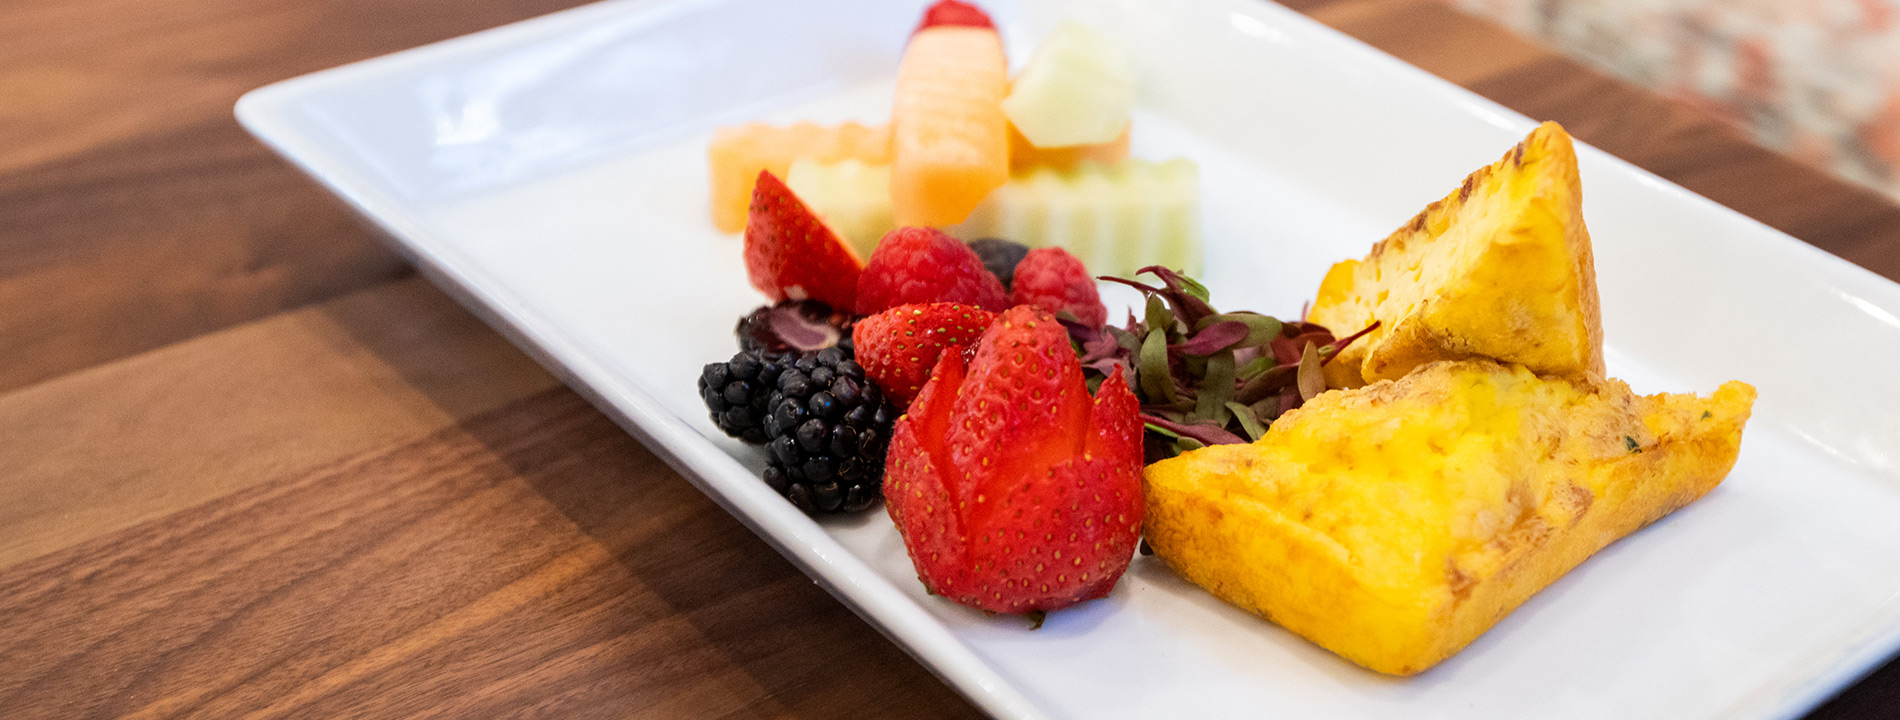 plate of assorted fruit